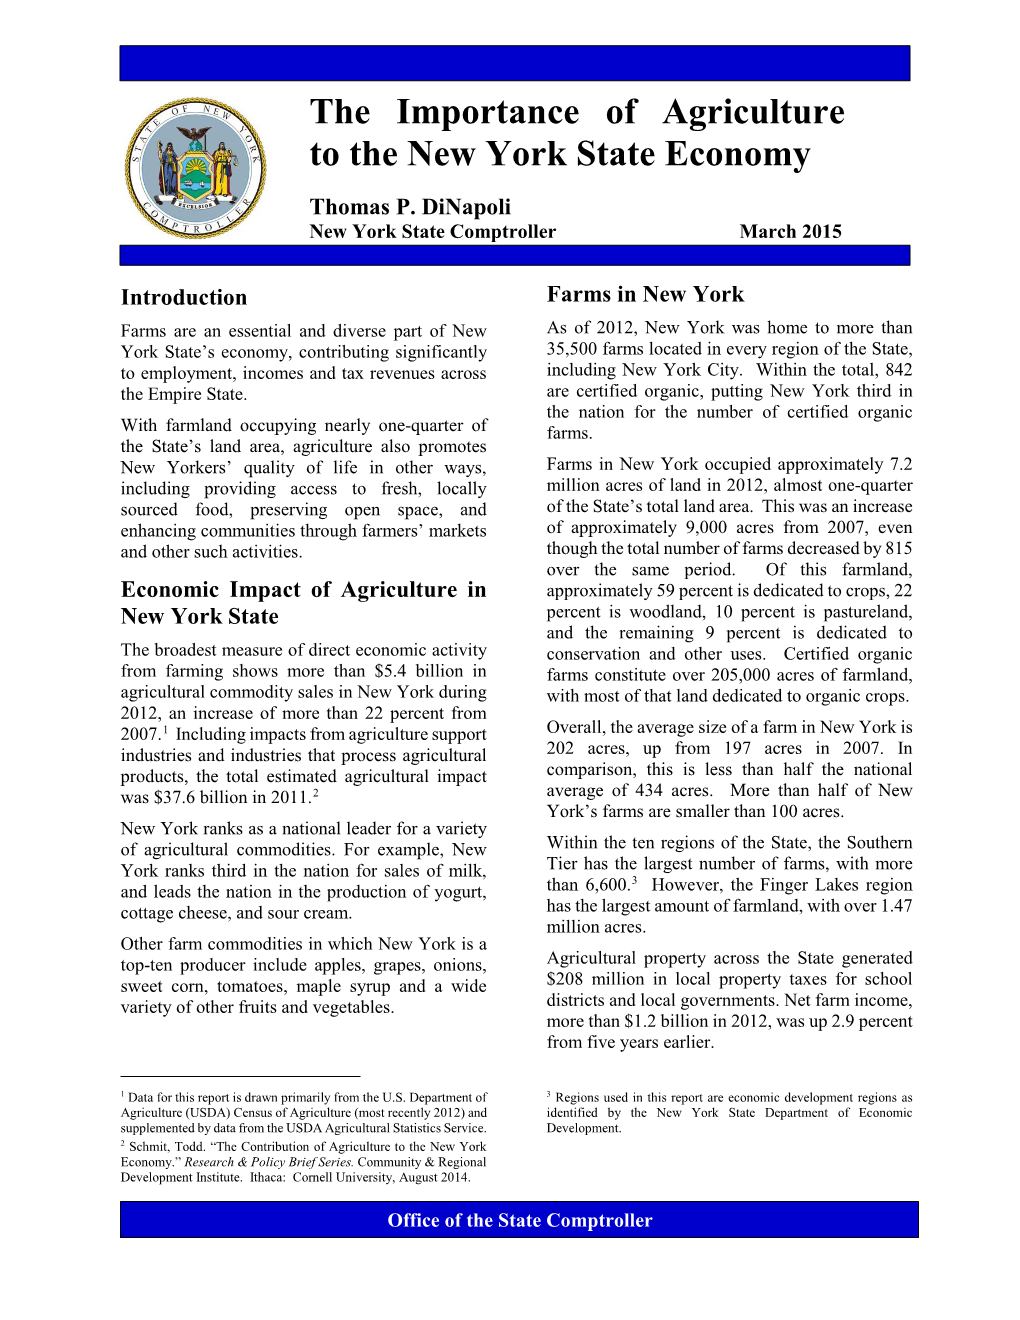 The Importance of Agriculture to the New York State Economy